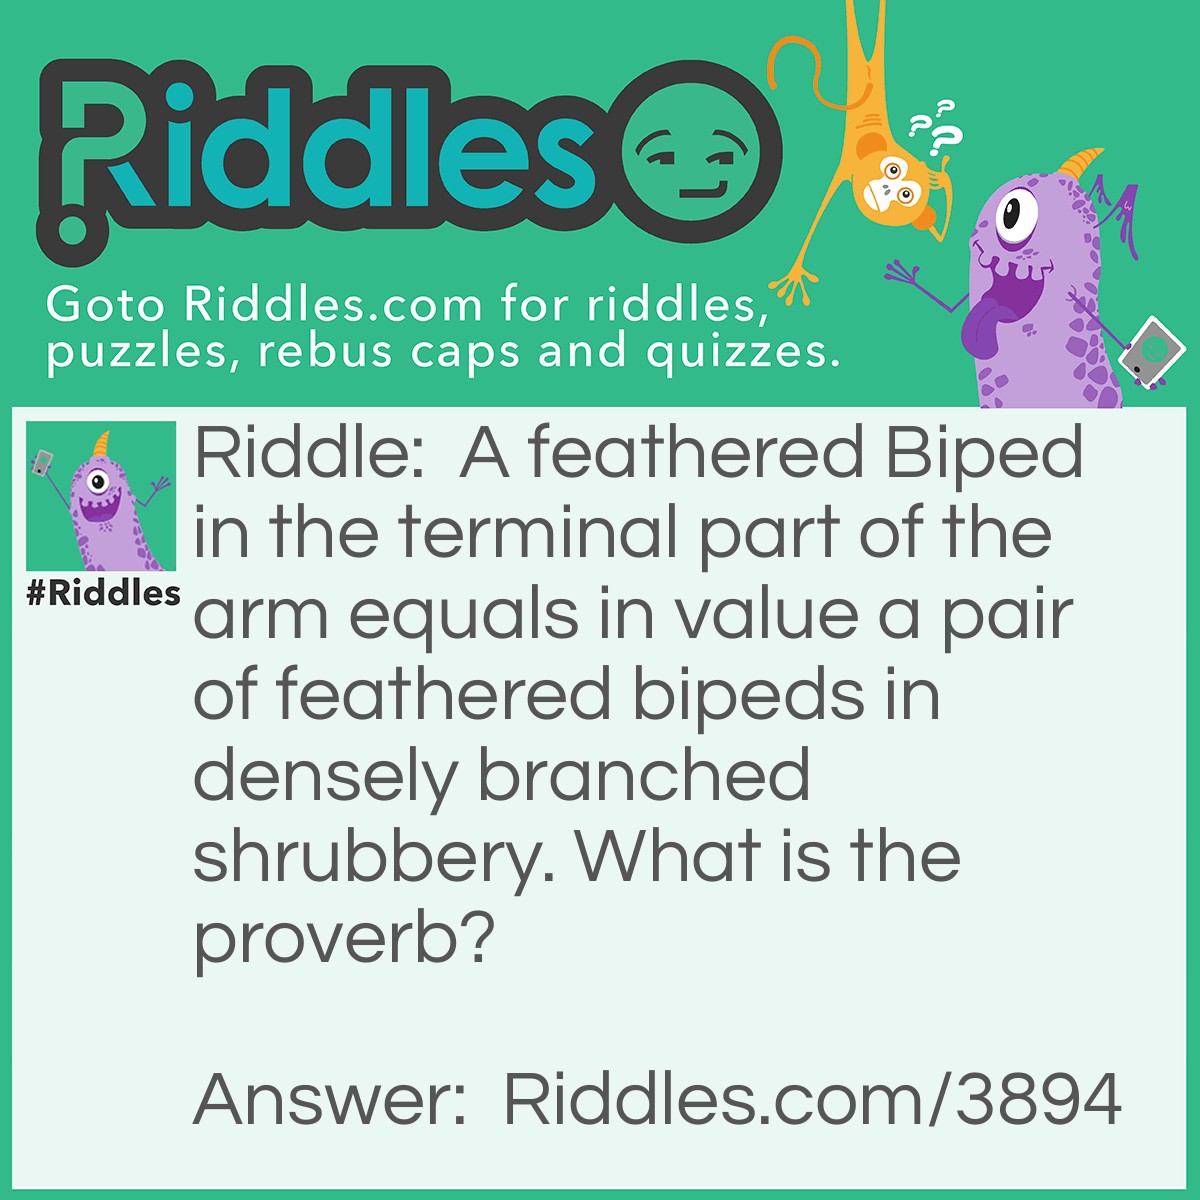 Riddle: A feathered Biped in the terminal part of the arm equals in value a pair of feathered bipeds in densely branched shrubbery. What is the proverb? Answer:  A bird in the hand is worth two in the bush.